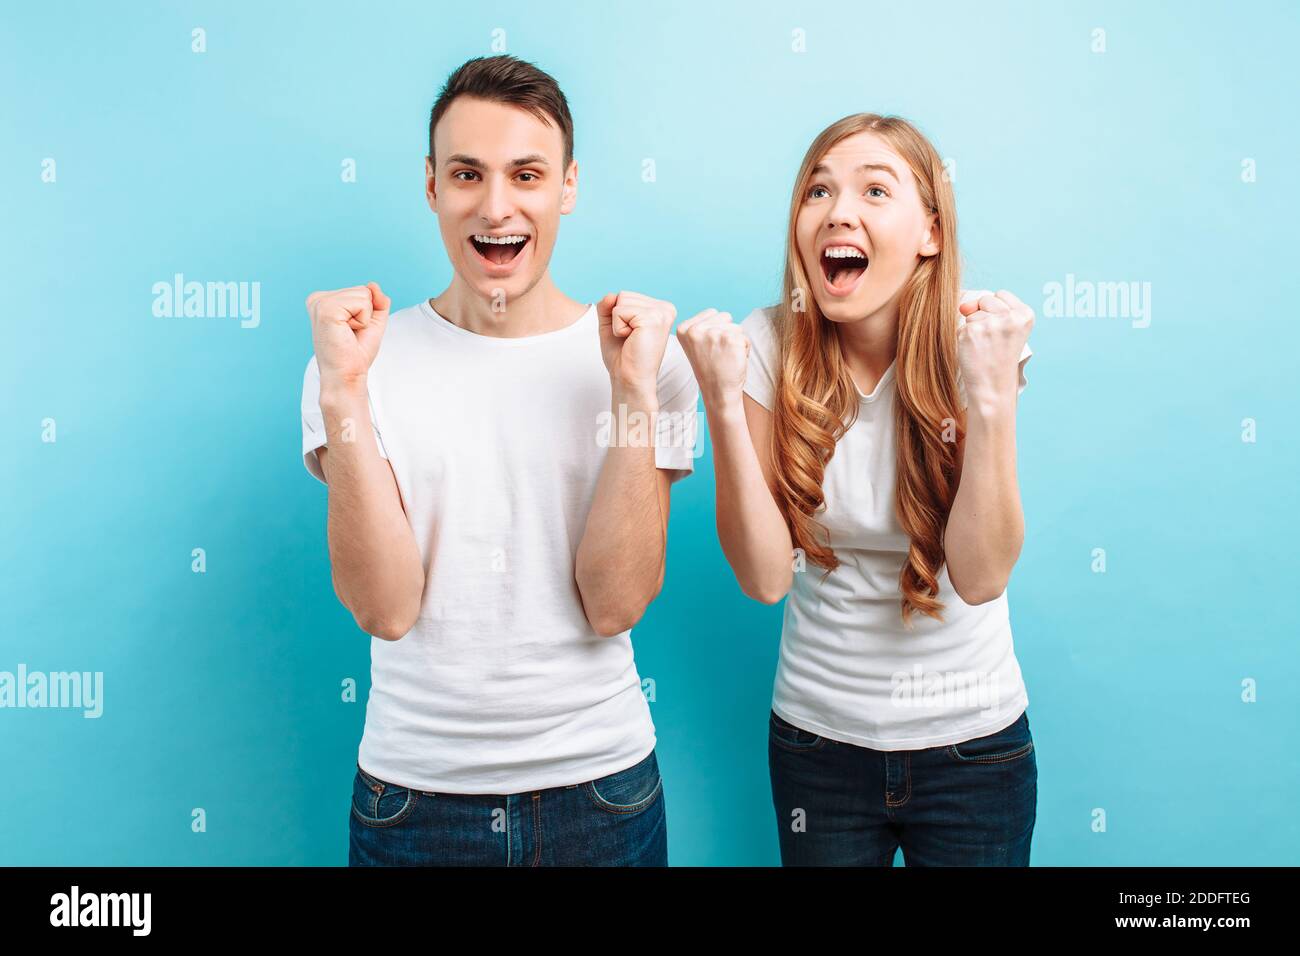 Portrait of an excited couple, a man and a woman in white t-shirts celebrating victory with fists raised, screaming, on a light blue background Stock Photo